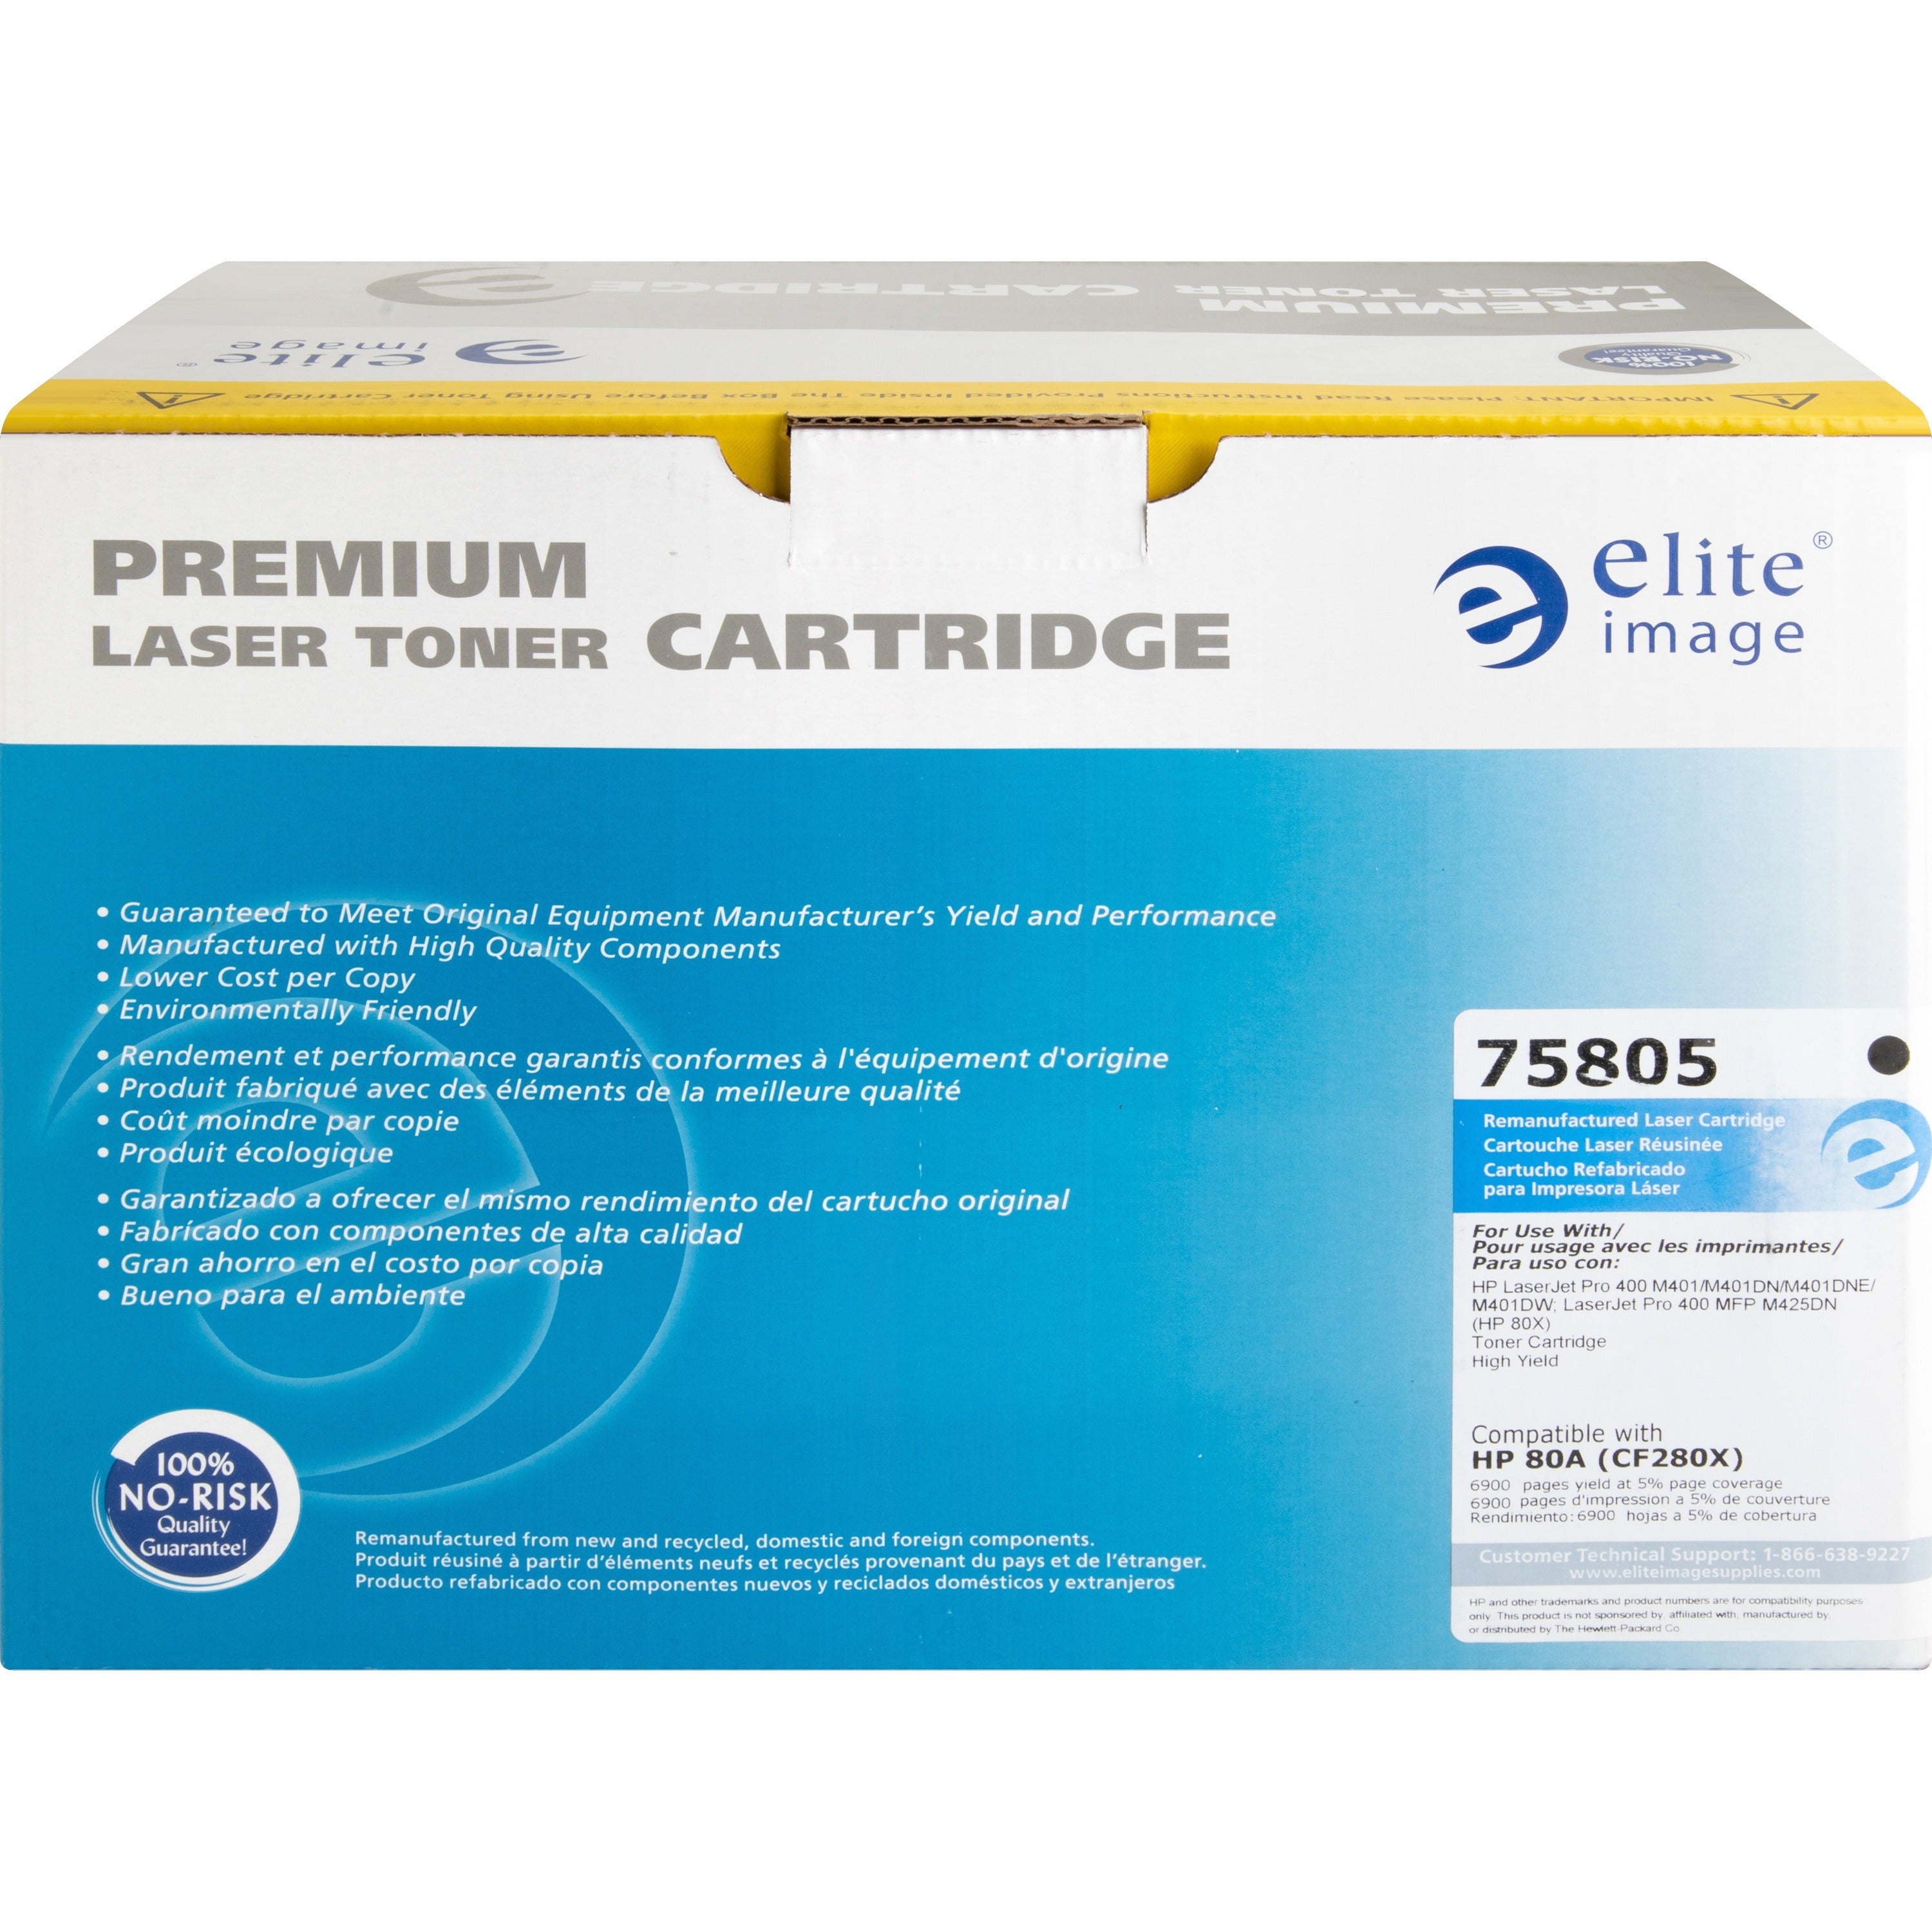 Elite Image Remanufactured High Yield Laser Toner Cartridge - Alternative for HP 80X (CF280X) - Black - 1 Each - 6900 Pages - 2